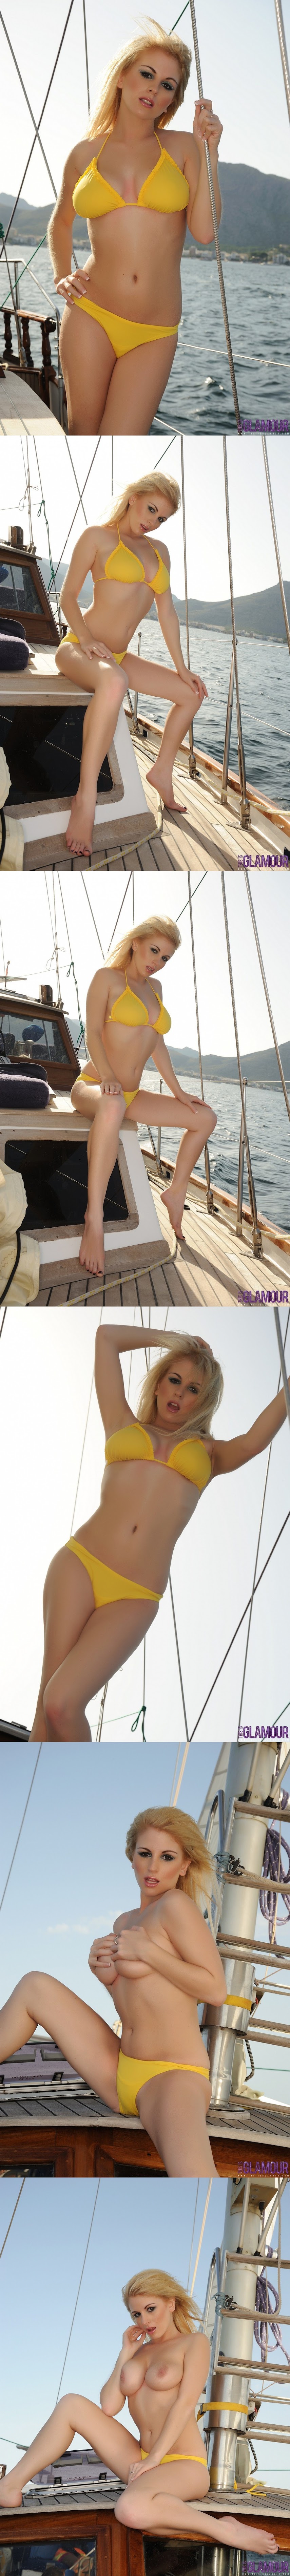 Zoe_Stollery_And_Amy_Lu_Bare_Their_Essentials.zip-jk- Zoe Stollery Sets Sail In A Canary Yellow Bikini thisisglamour 10280 